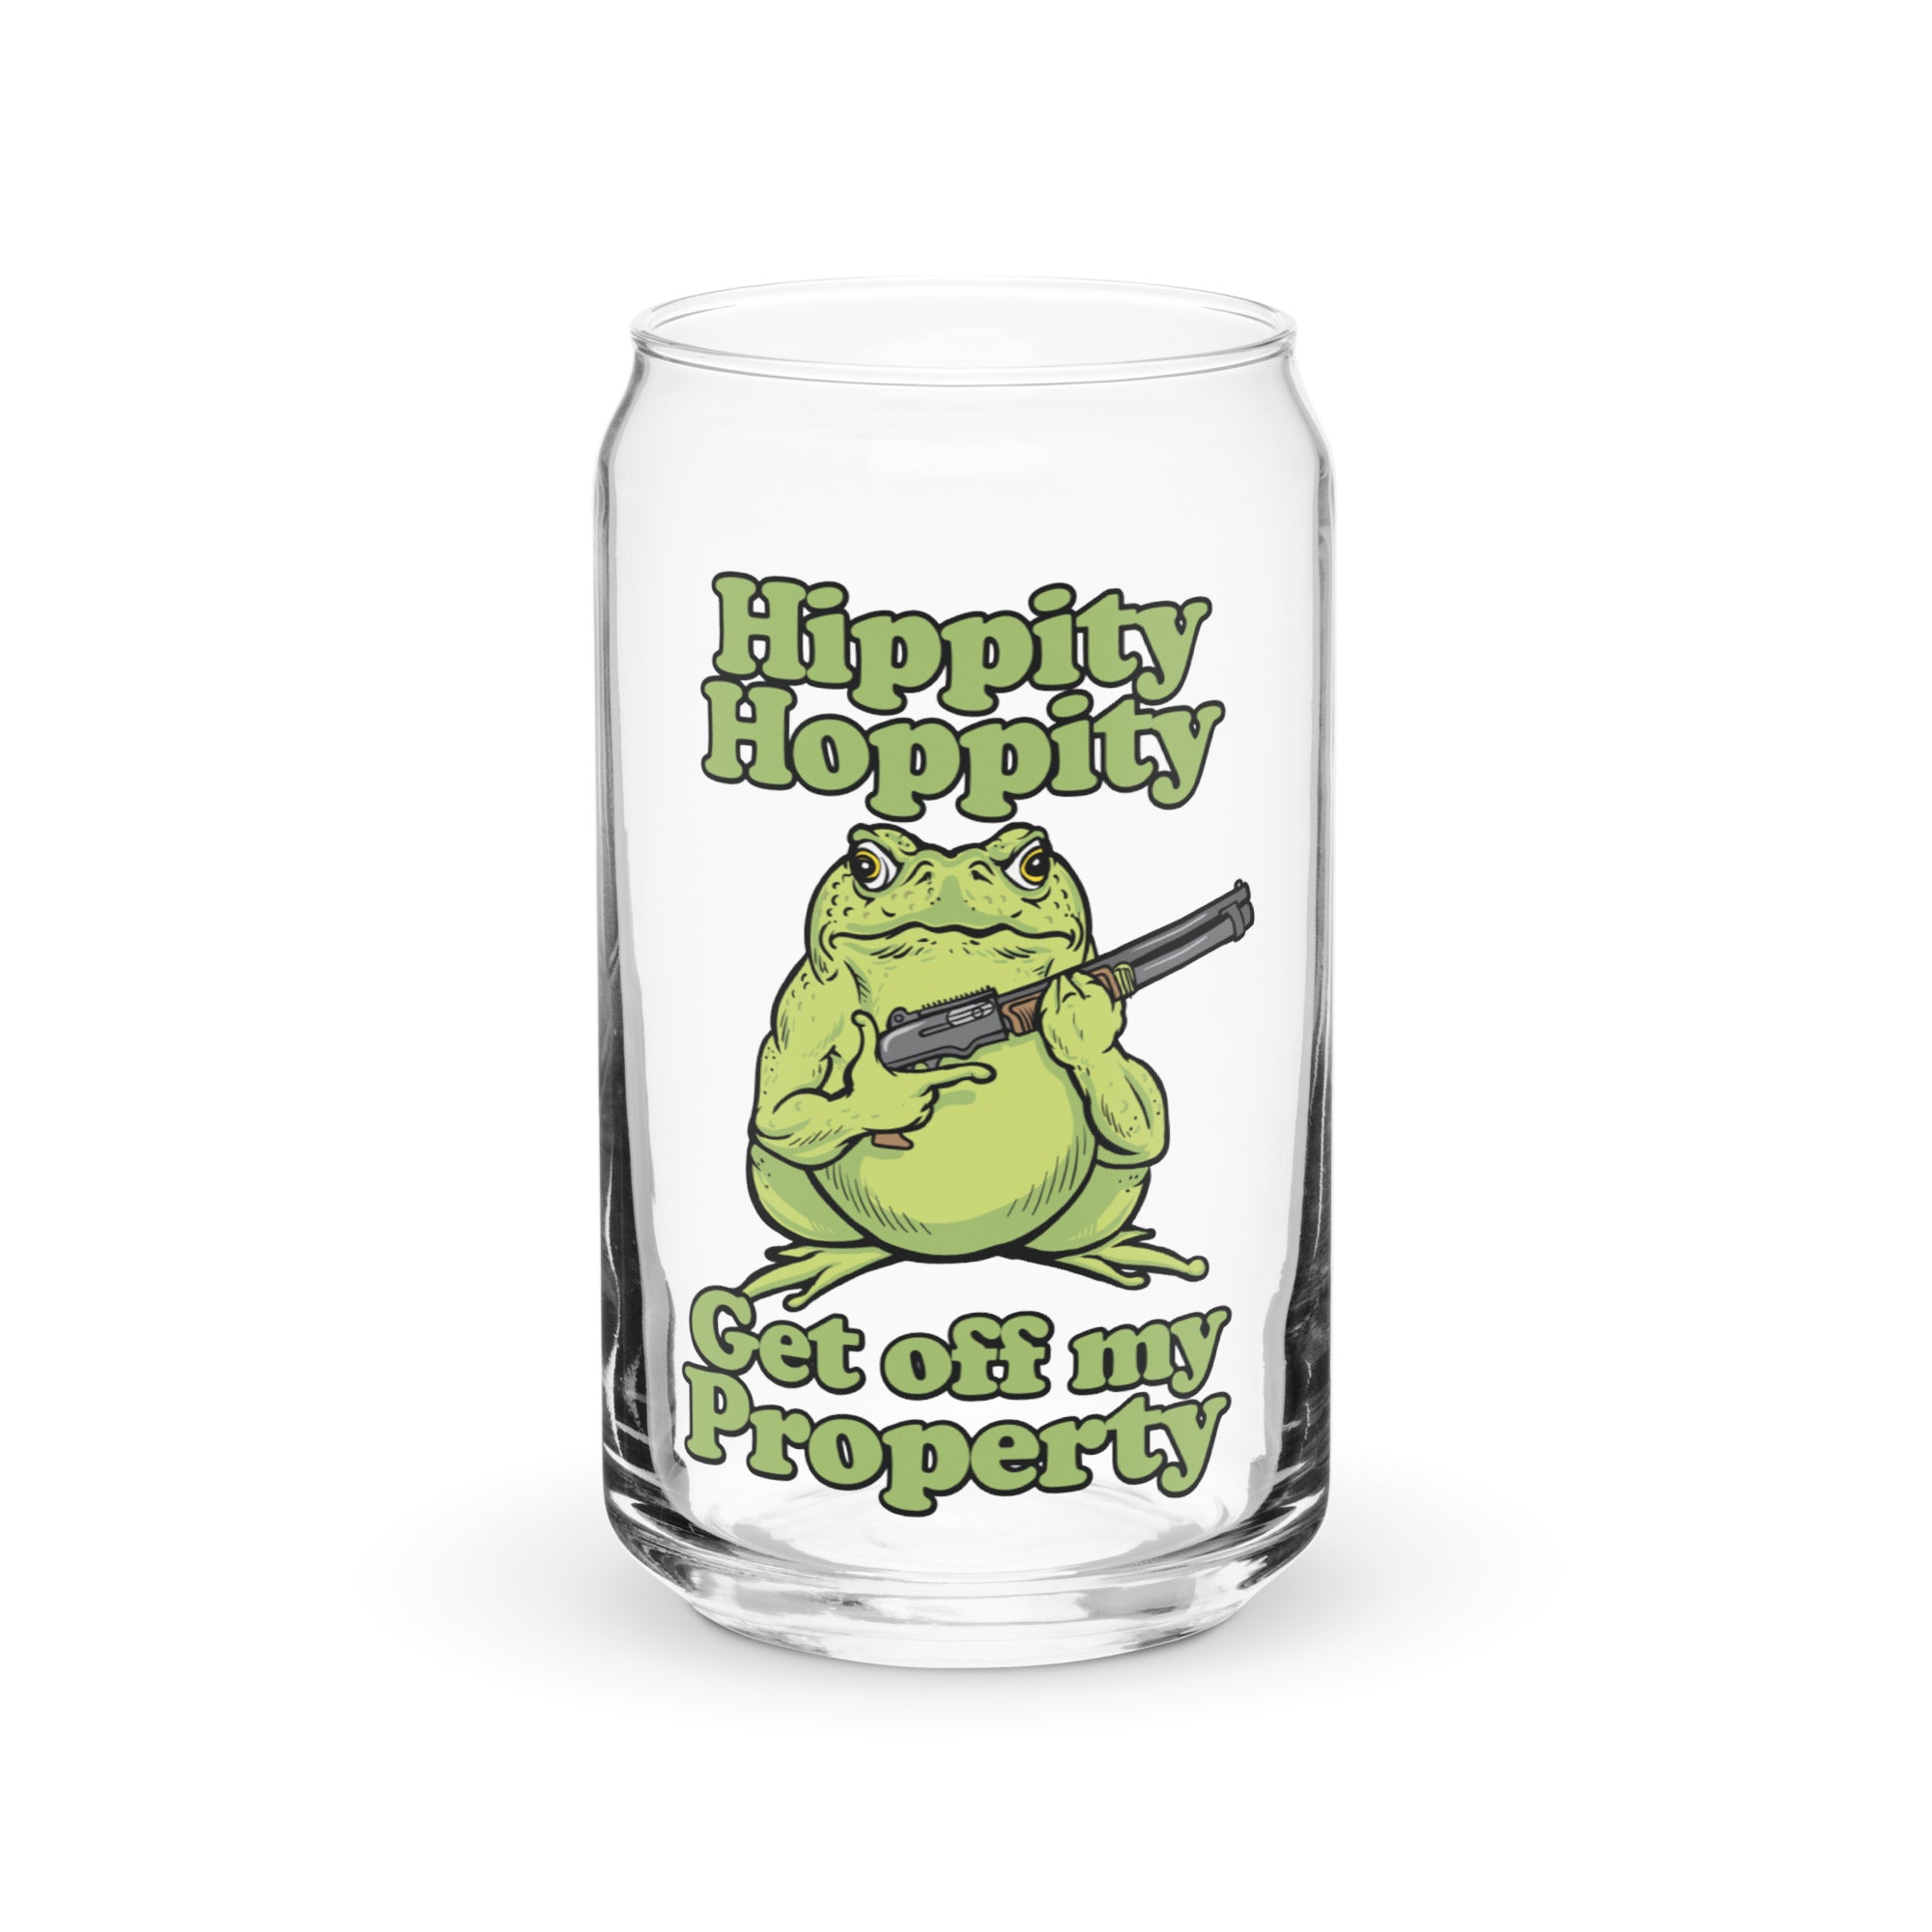 Hippity Hoppity Get Off My Property Can-Shaped Glass